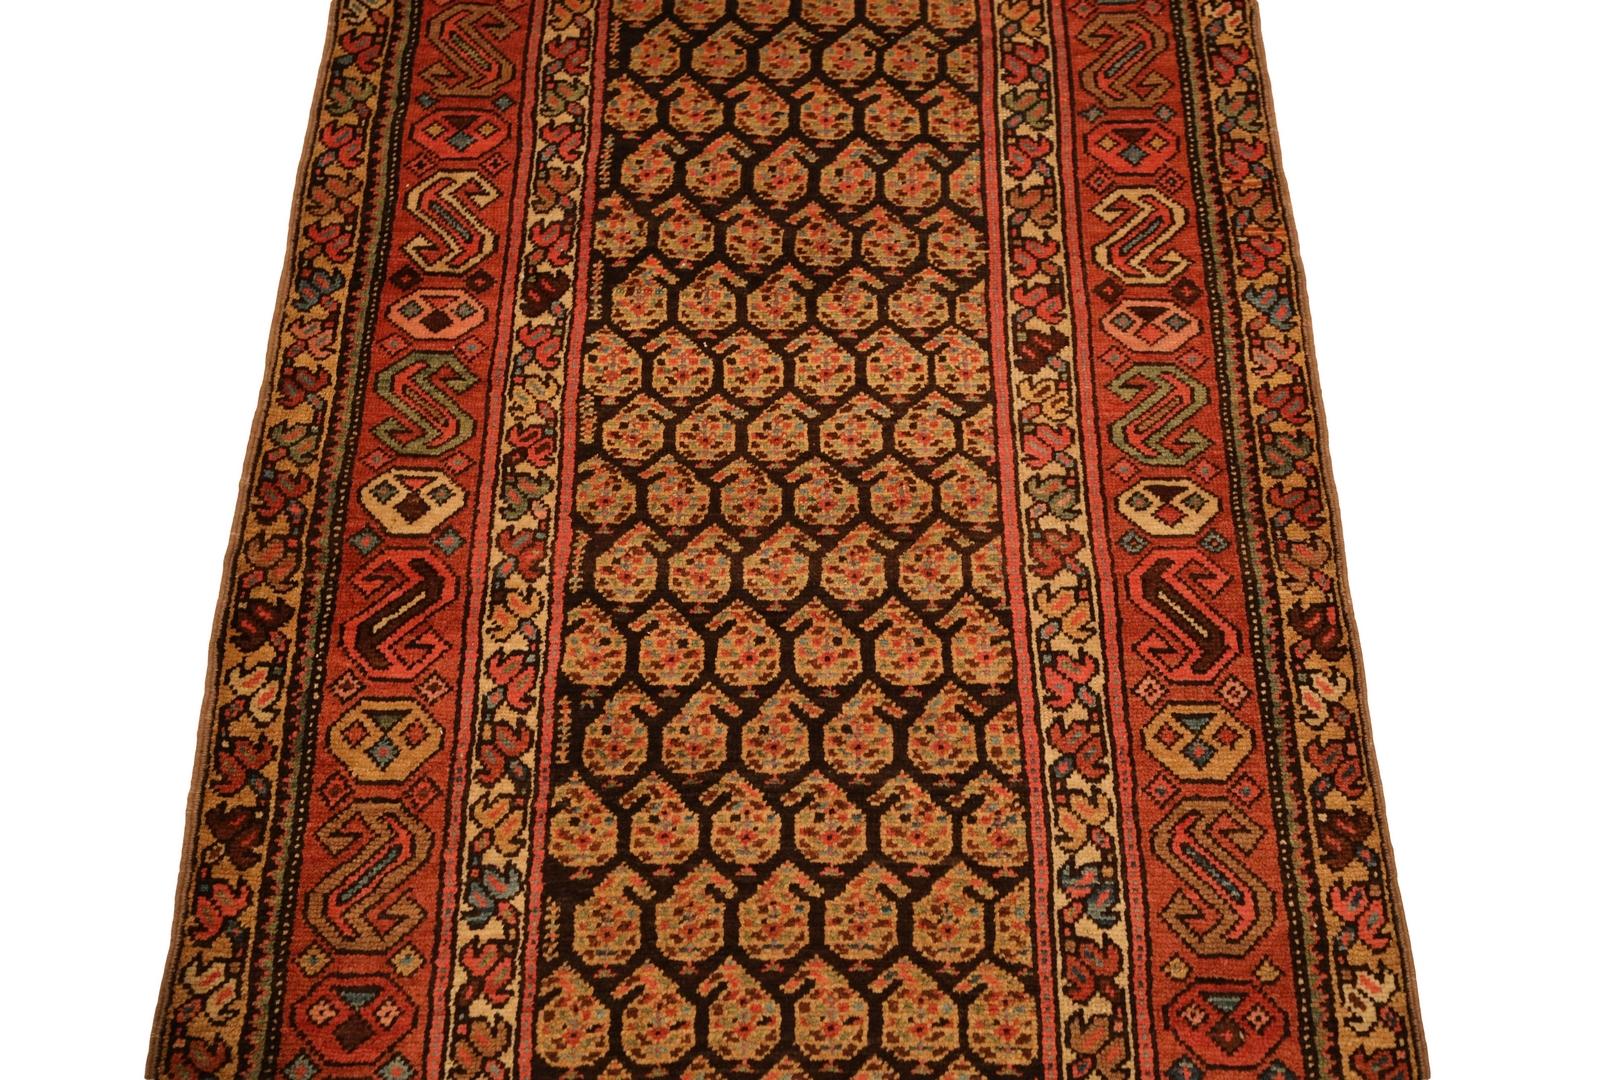 Hand-Knotted Malayer Antique Boteh Runner - 3'2